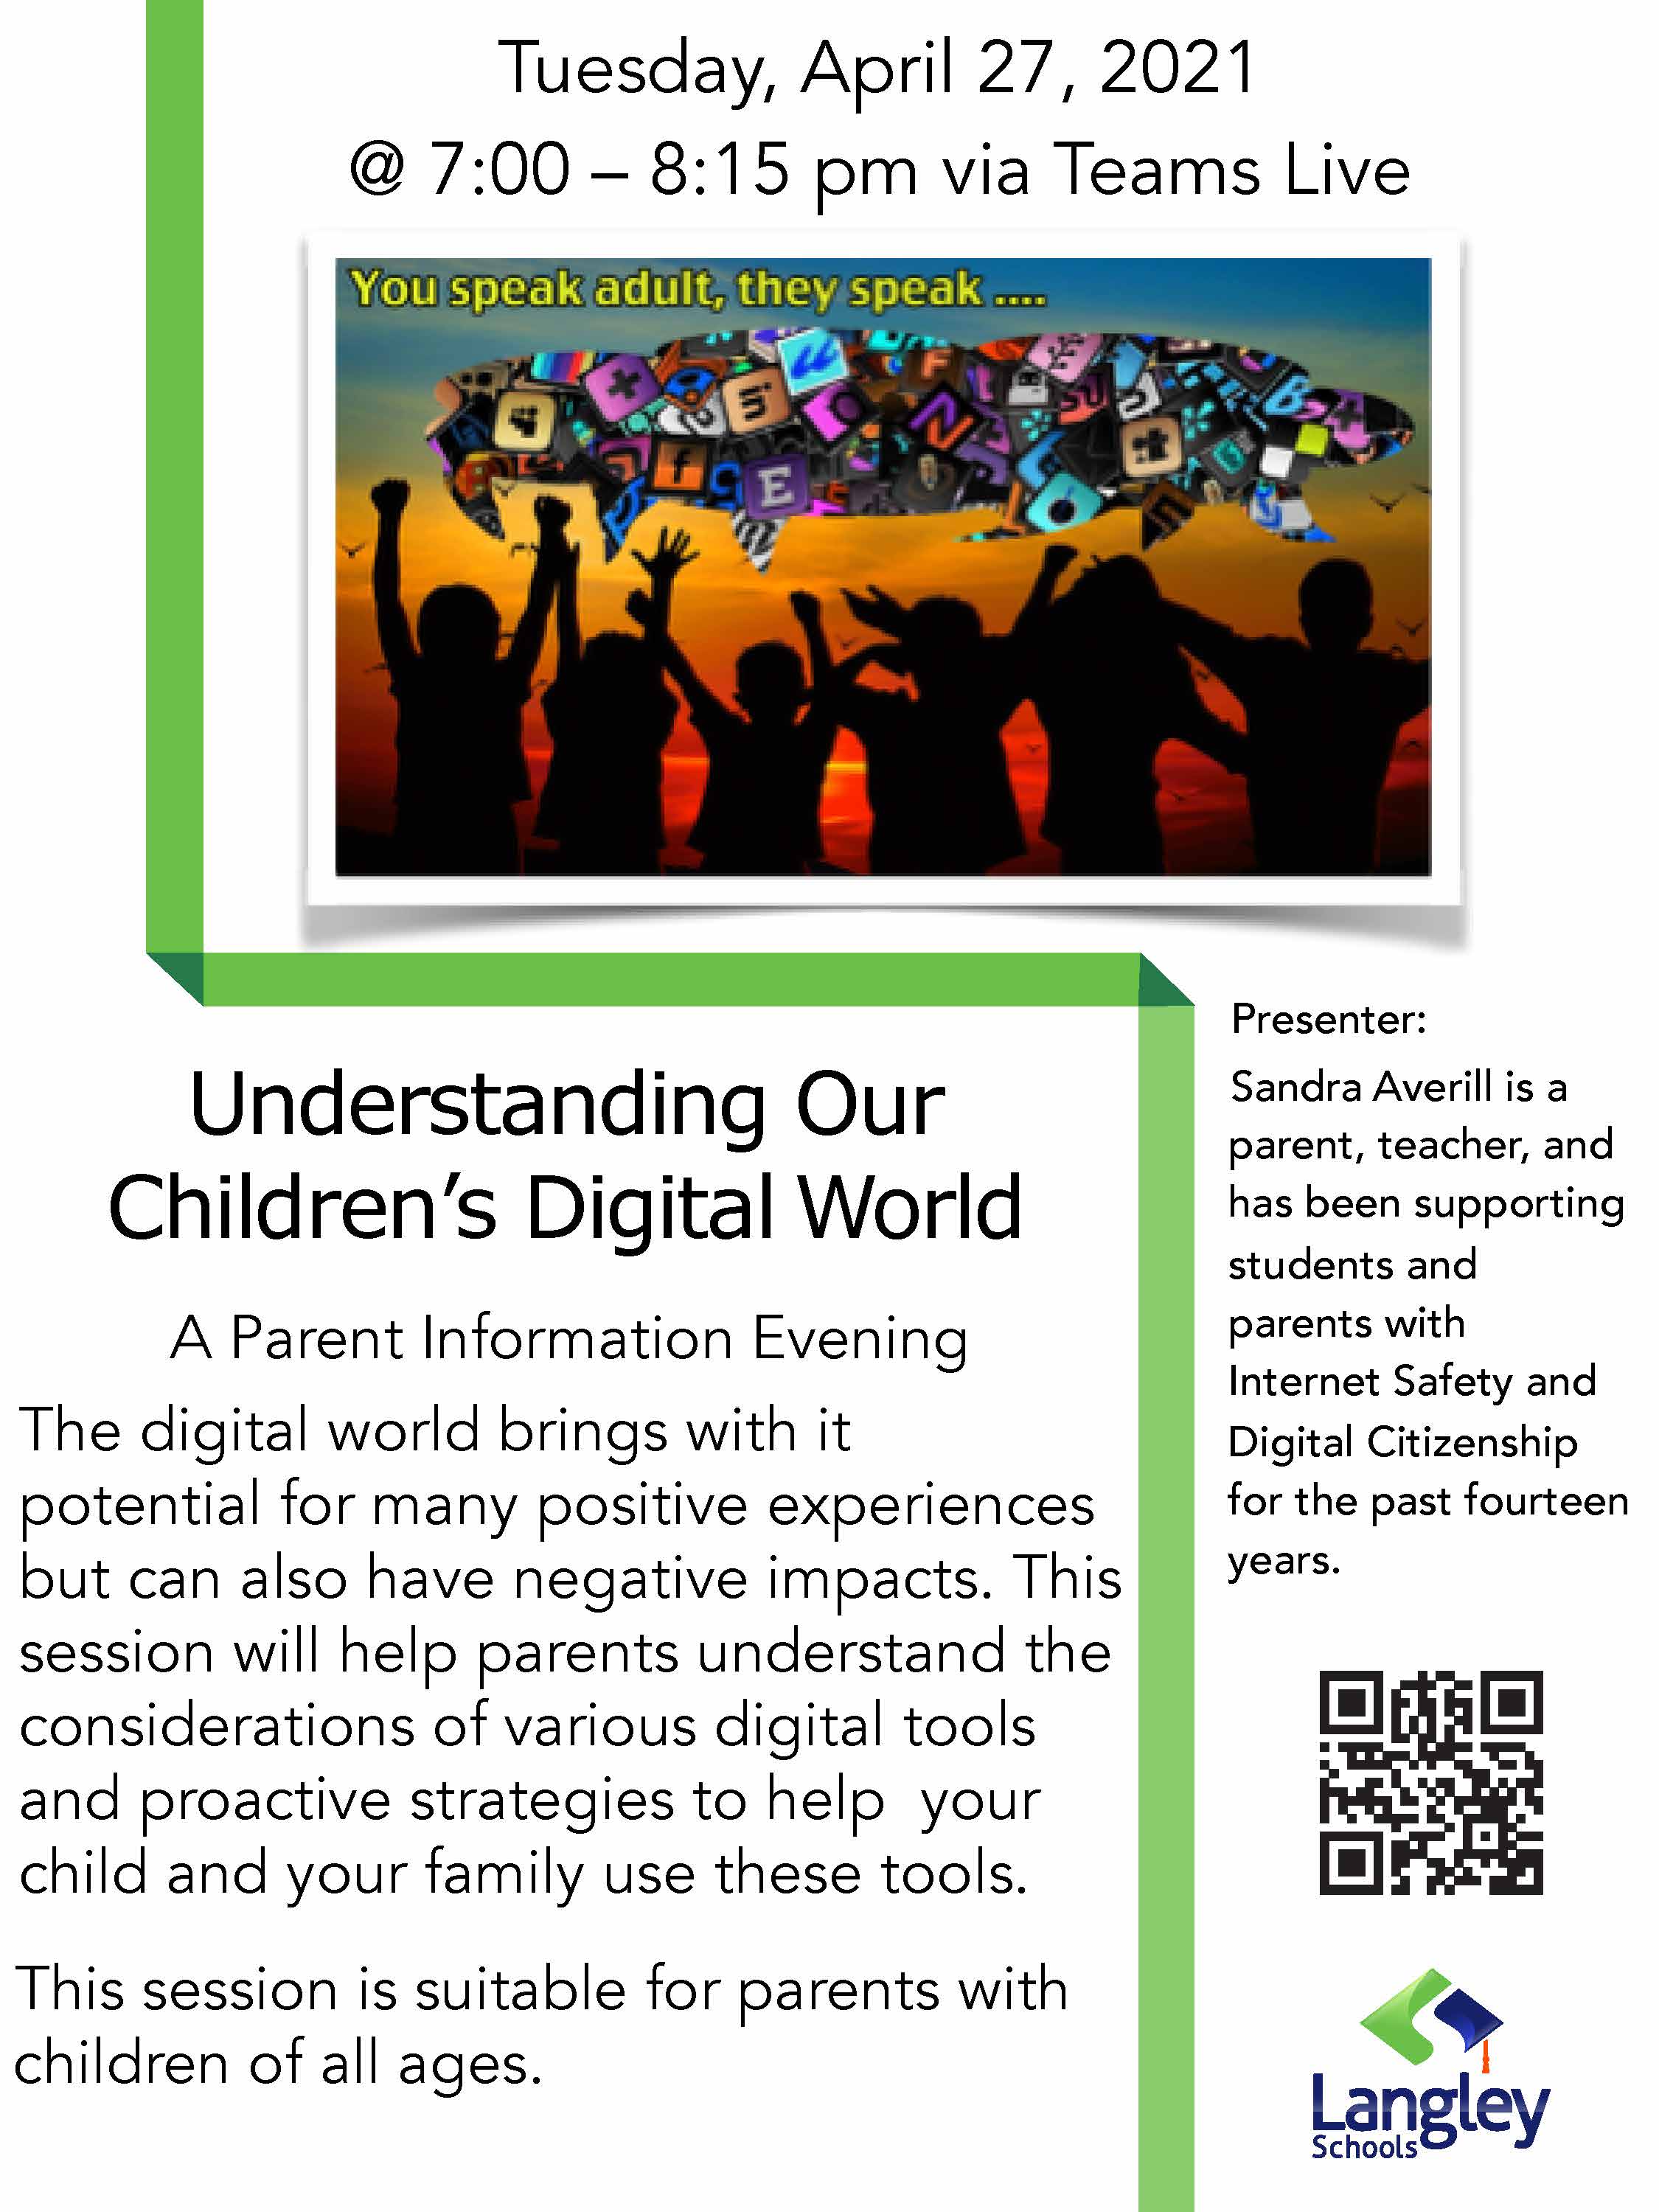 Langley Schools Reminder Tomorrow The District Is Hosting Understanding Our Children S Digital World A Parent Information Evening This Session Will Help Parents Develop Proactive Strategies To Help Your Child